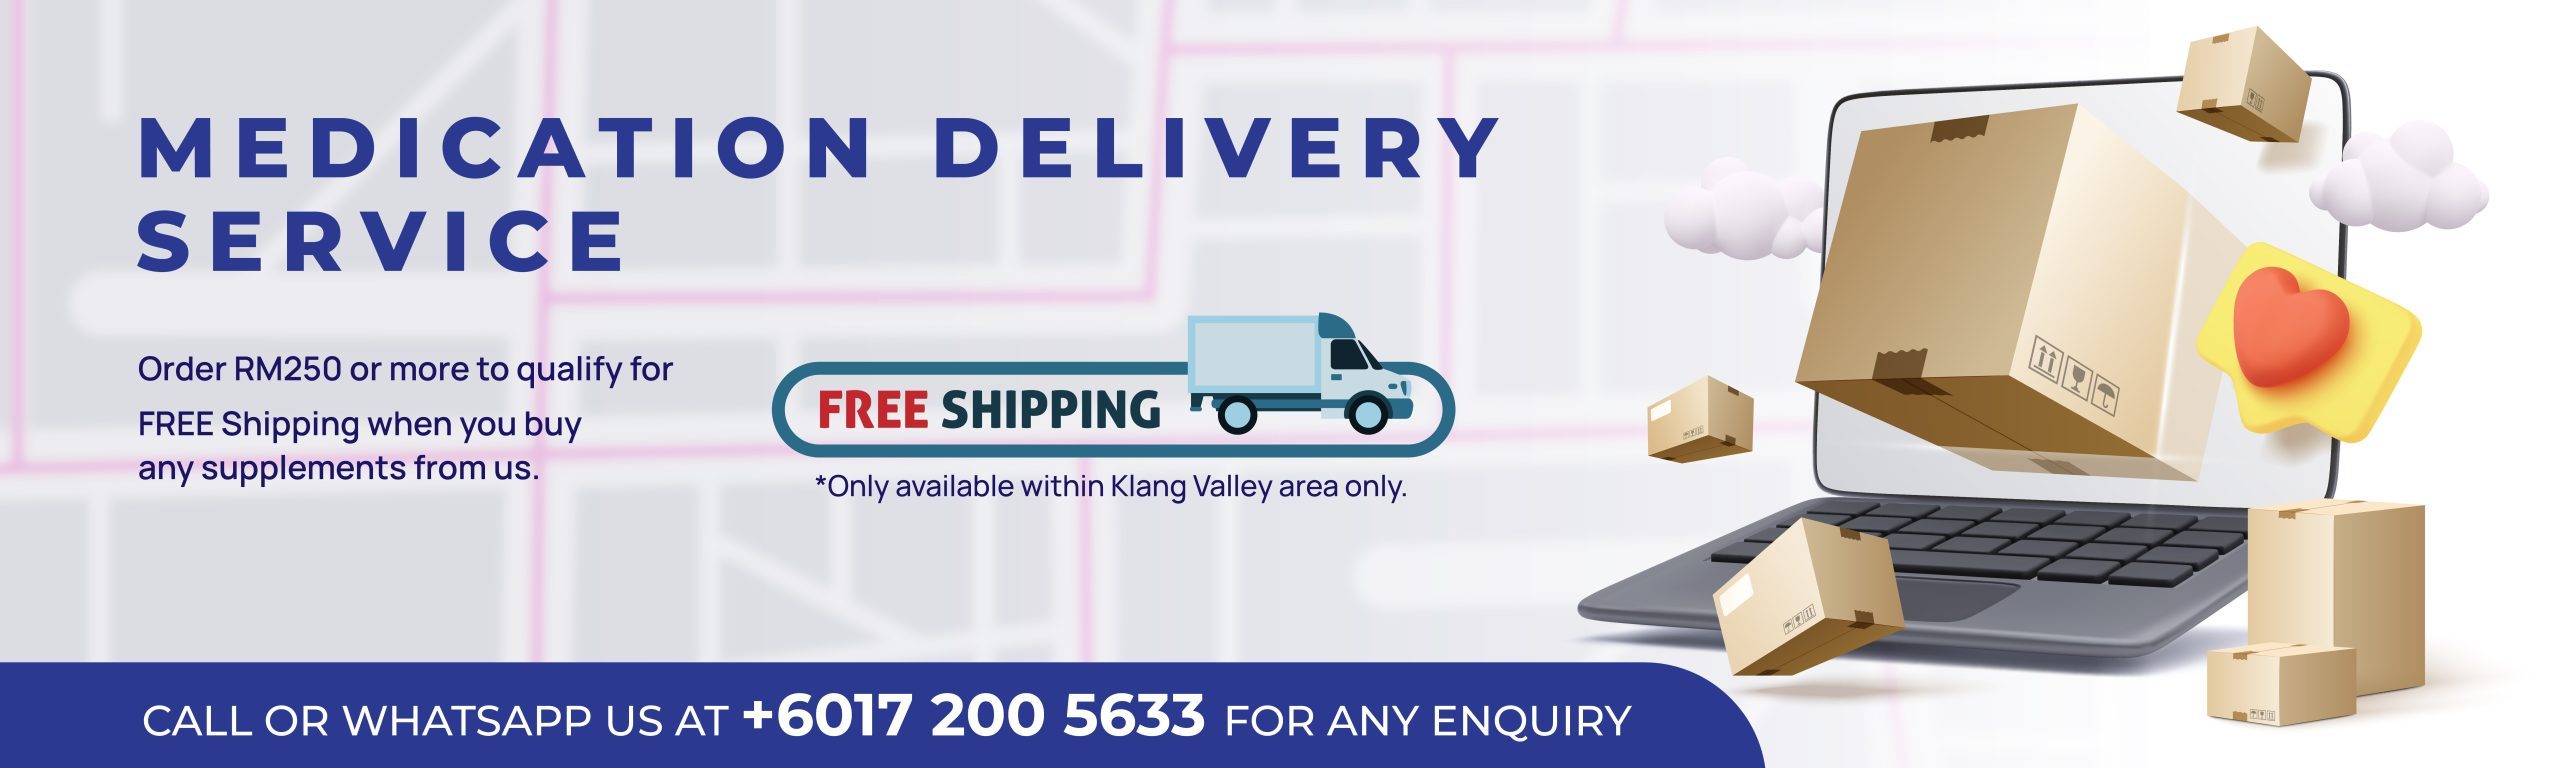 FREE-DELIVERY-01-scaled.jpg